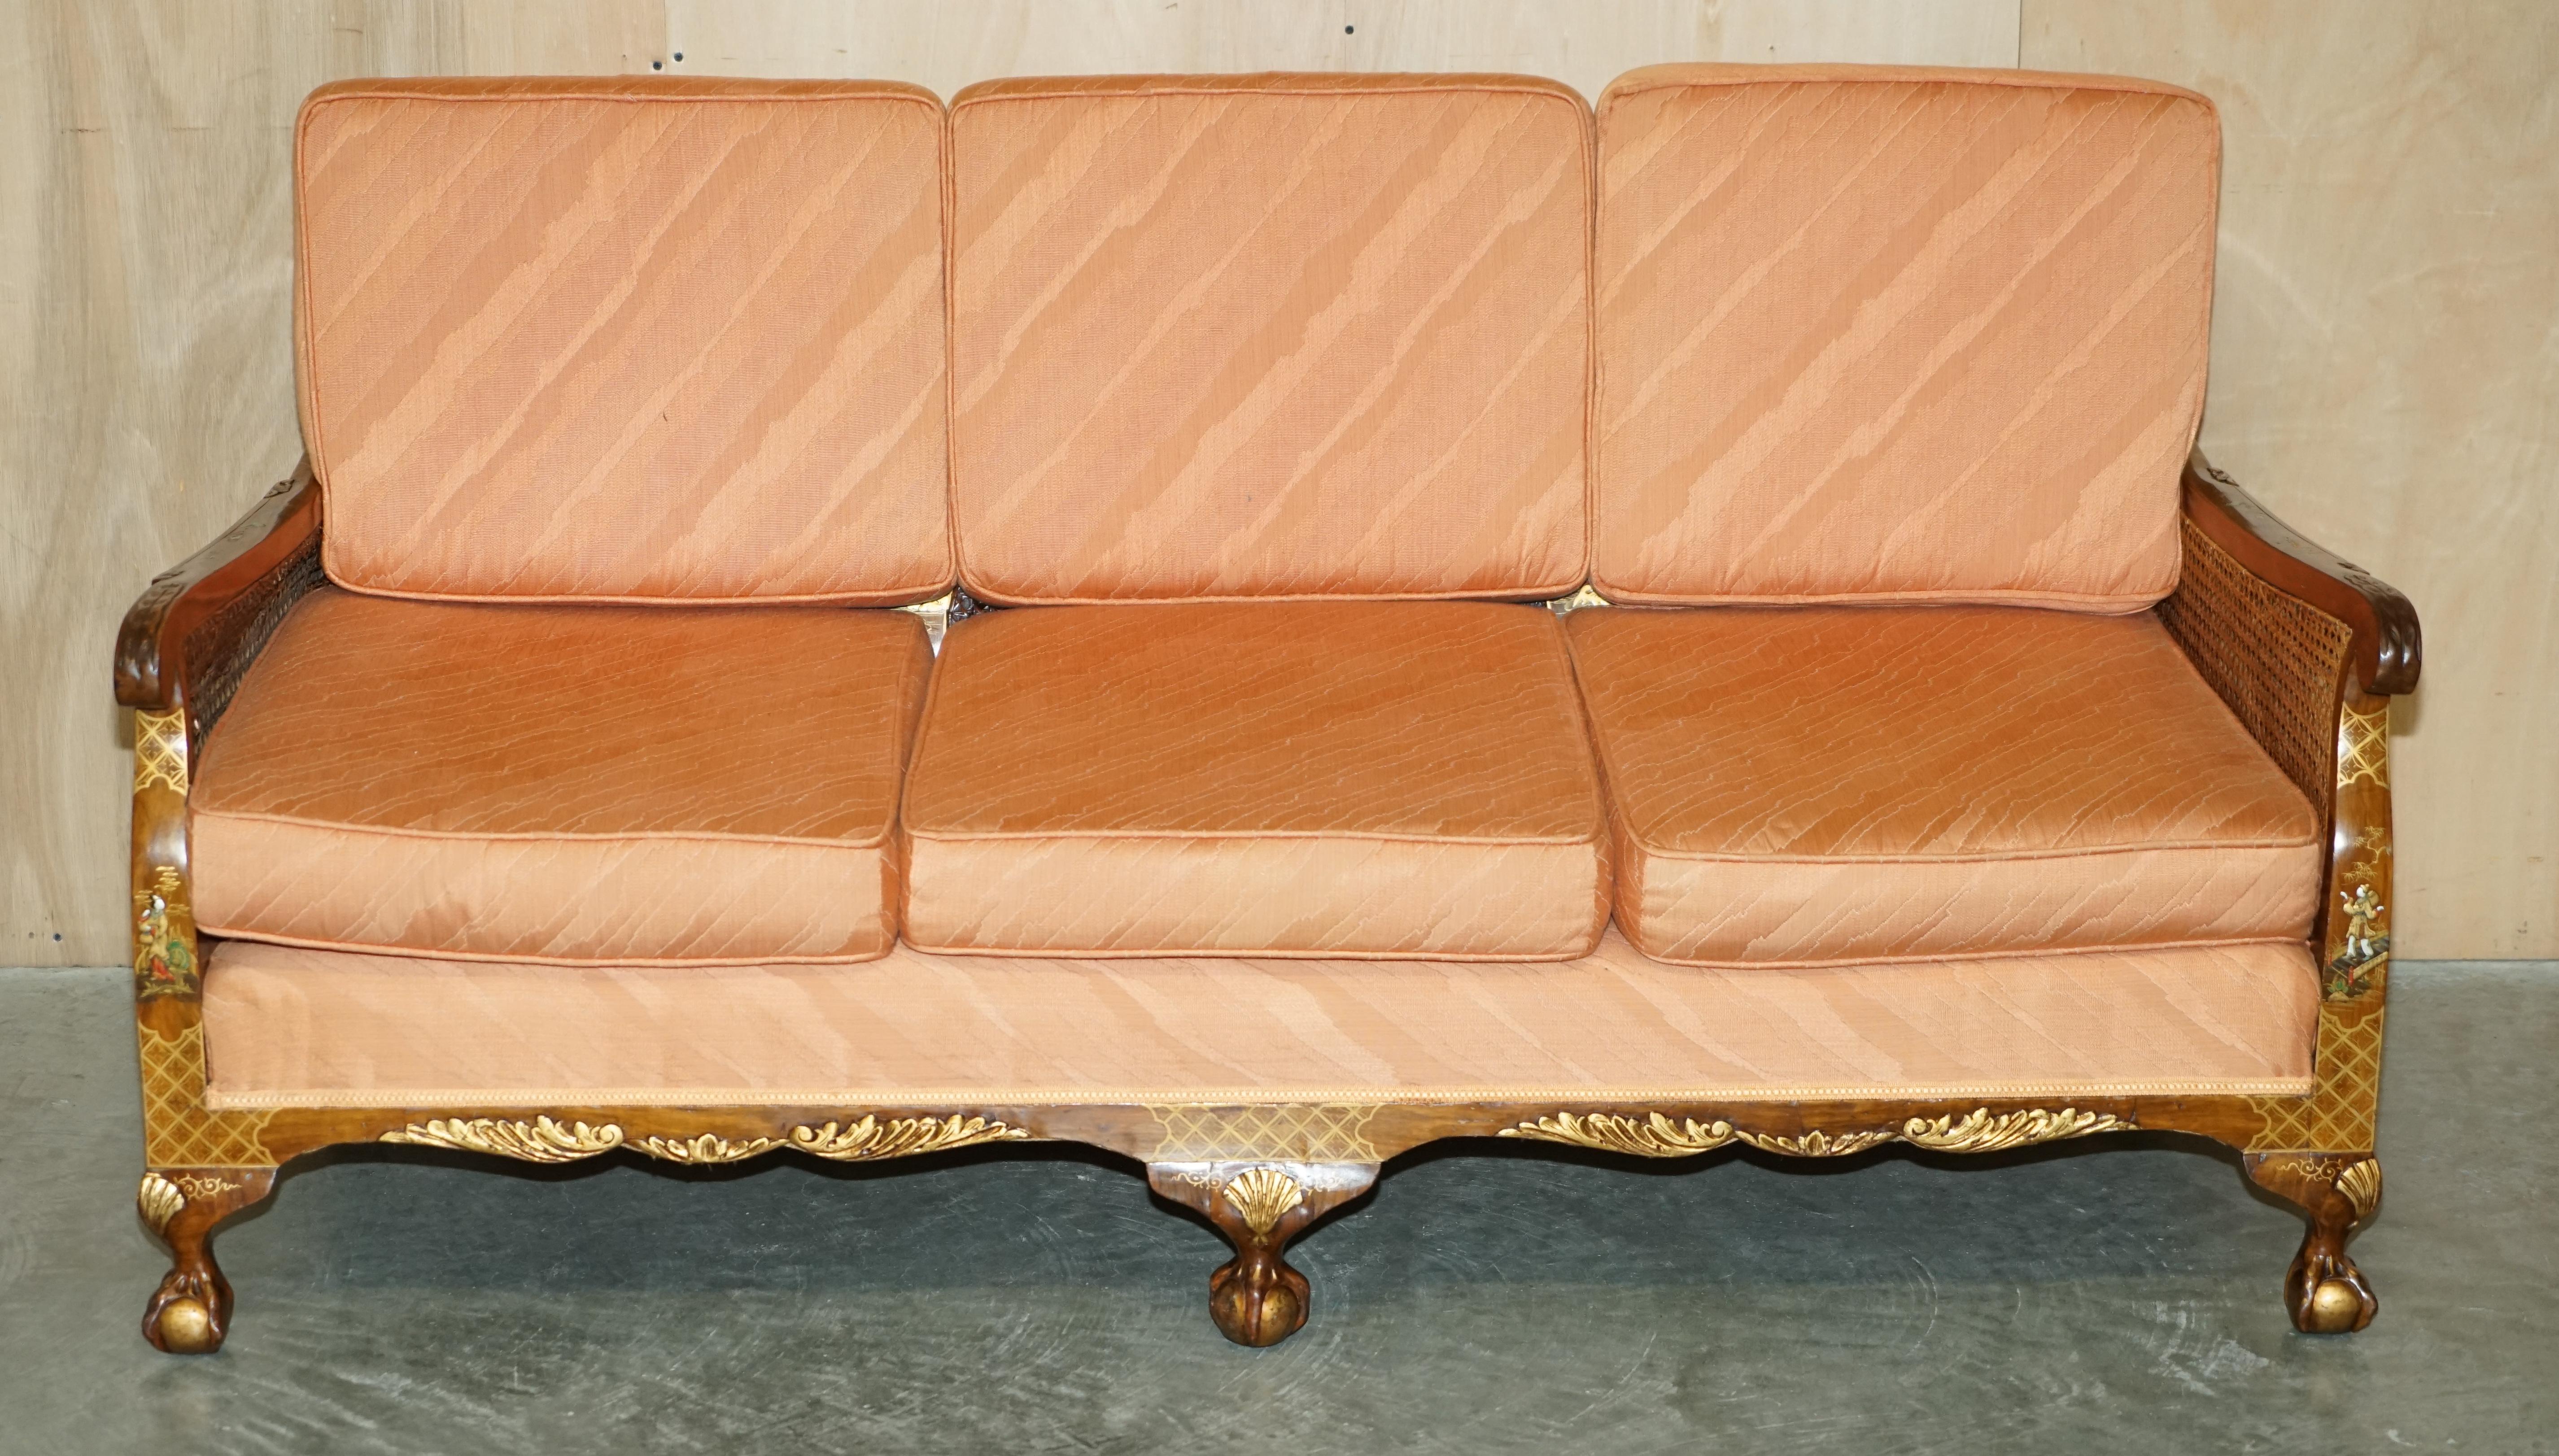 Hand-Crafted 1920's WALNUT & CHINOISERIE 3 PIECE BERGERE SOFA ARMCHAIR SUITE FOR RESTORATION For Sale